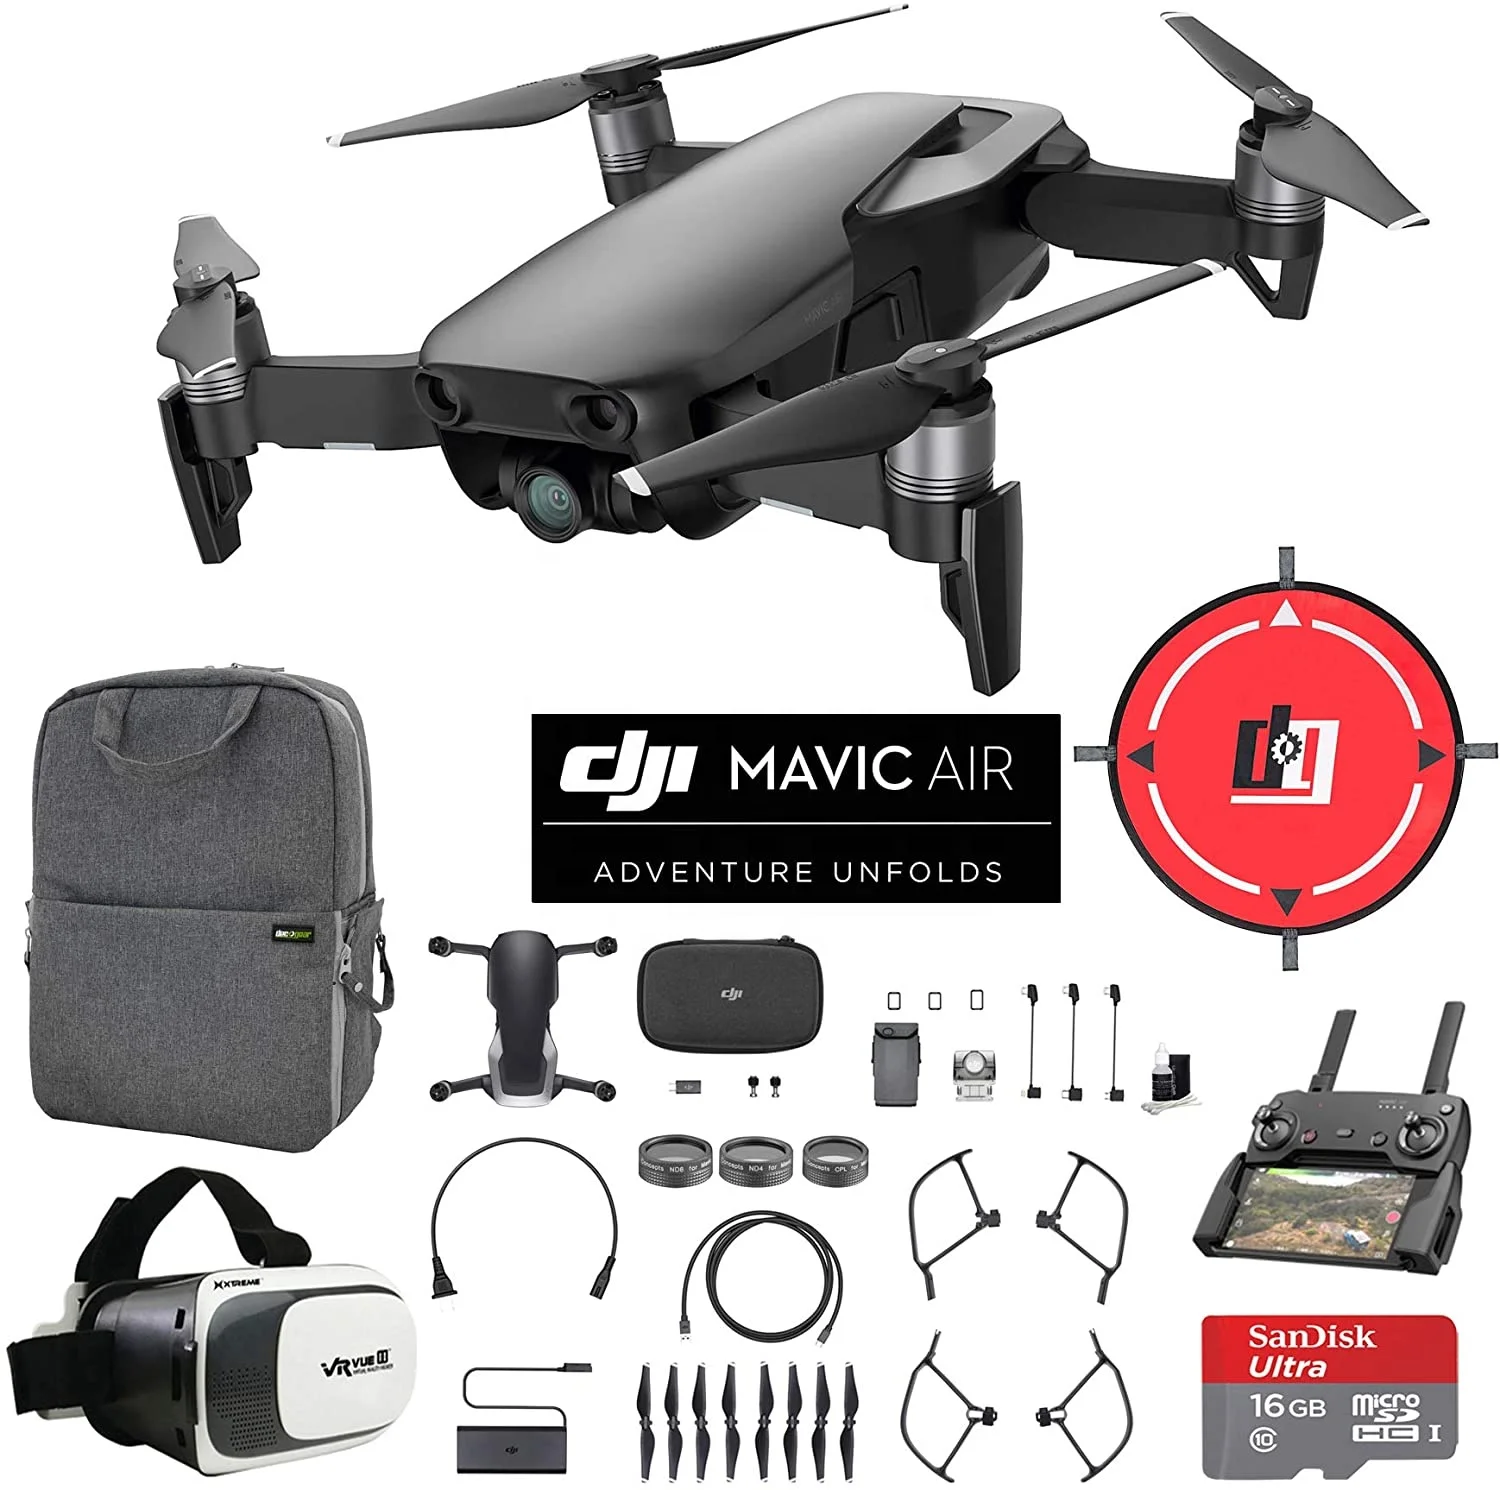 100% Original and Brand New Sealed for DJI Mavic Air Quadcopter Drone - Onyx Black Fly More Combo with CoPilot Bundle